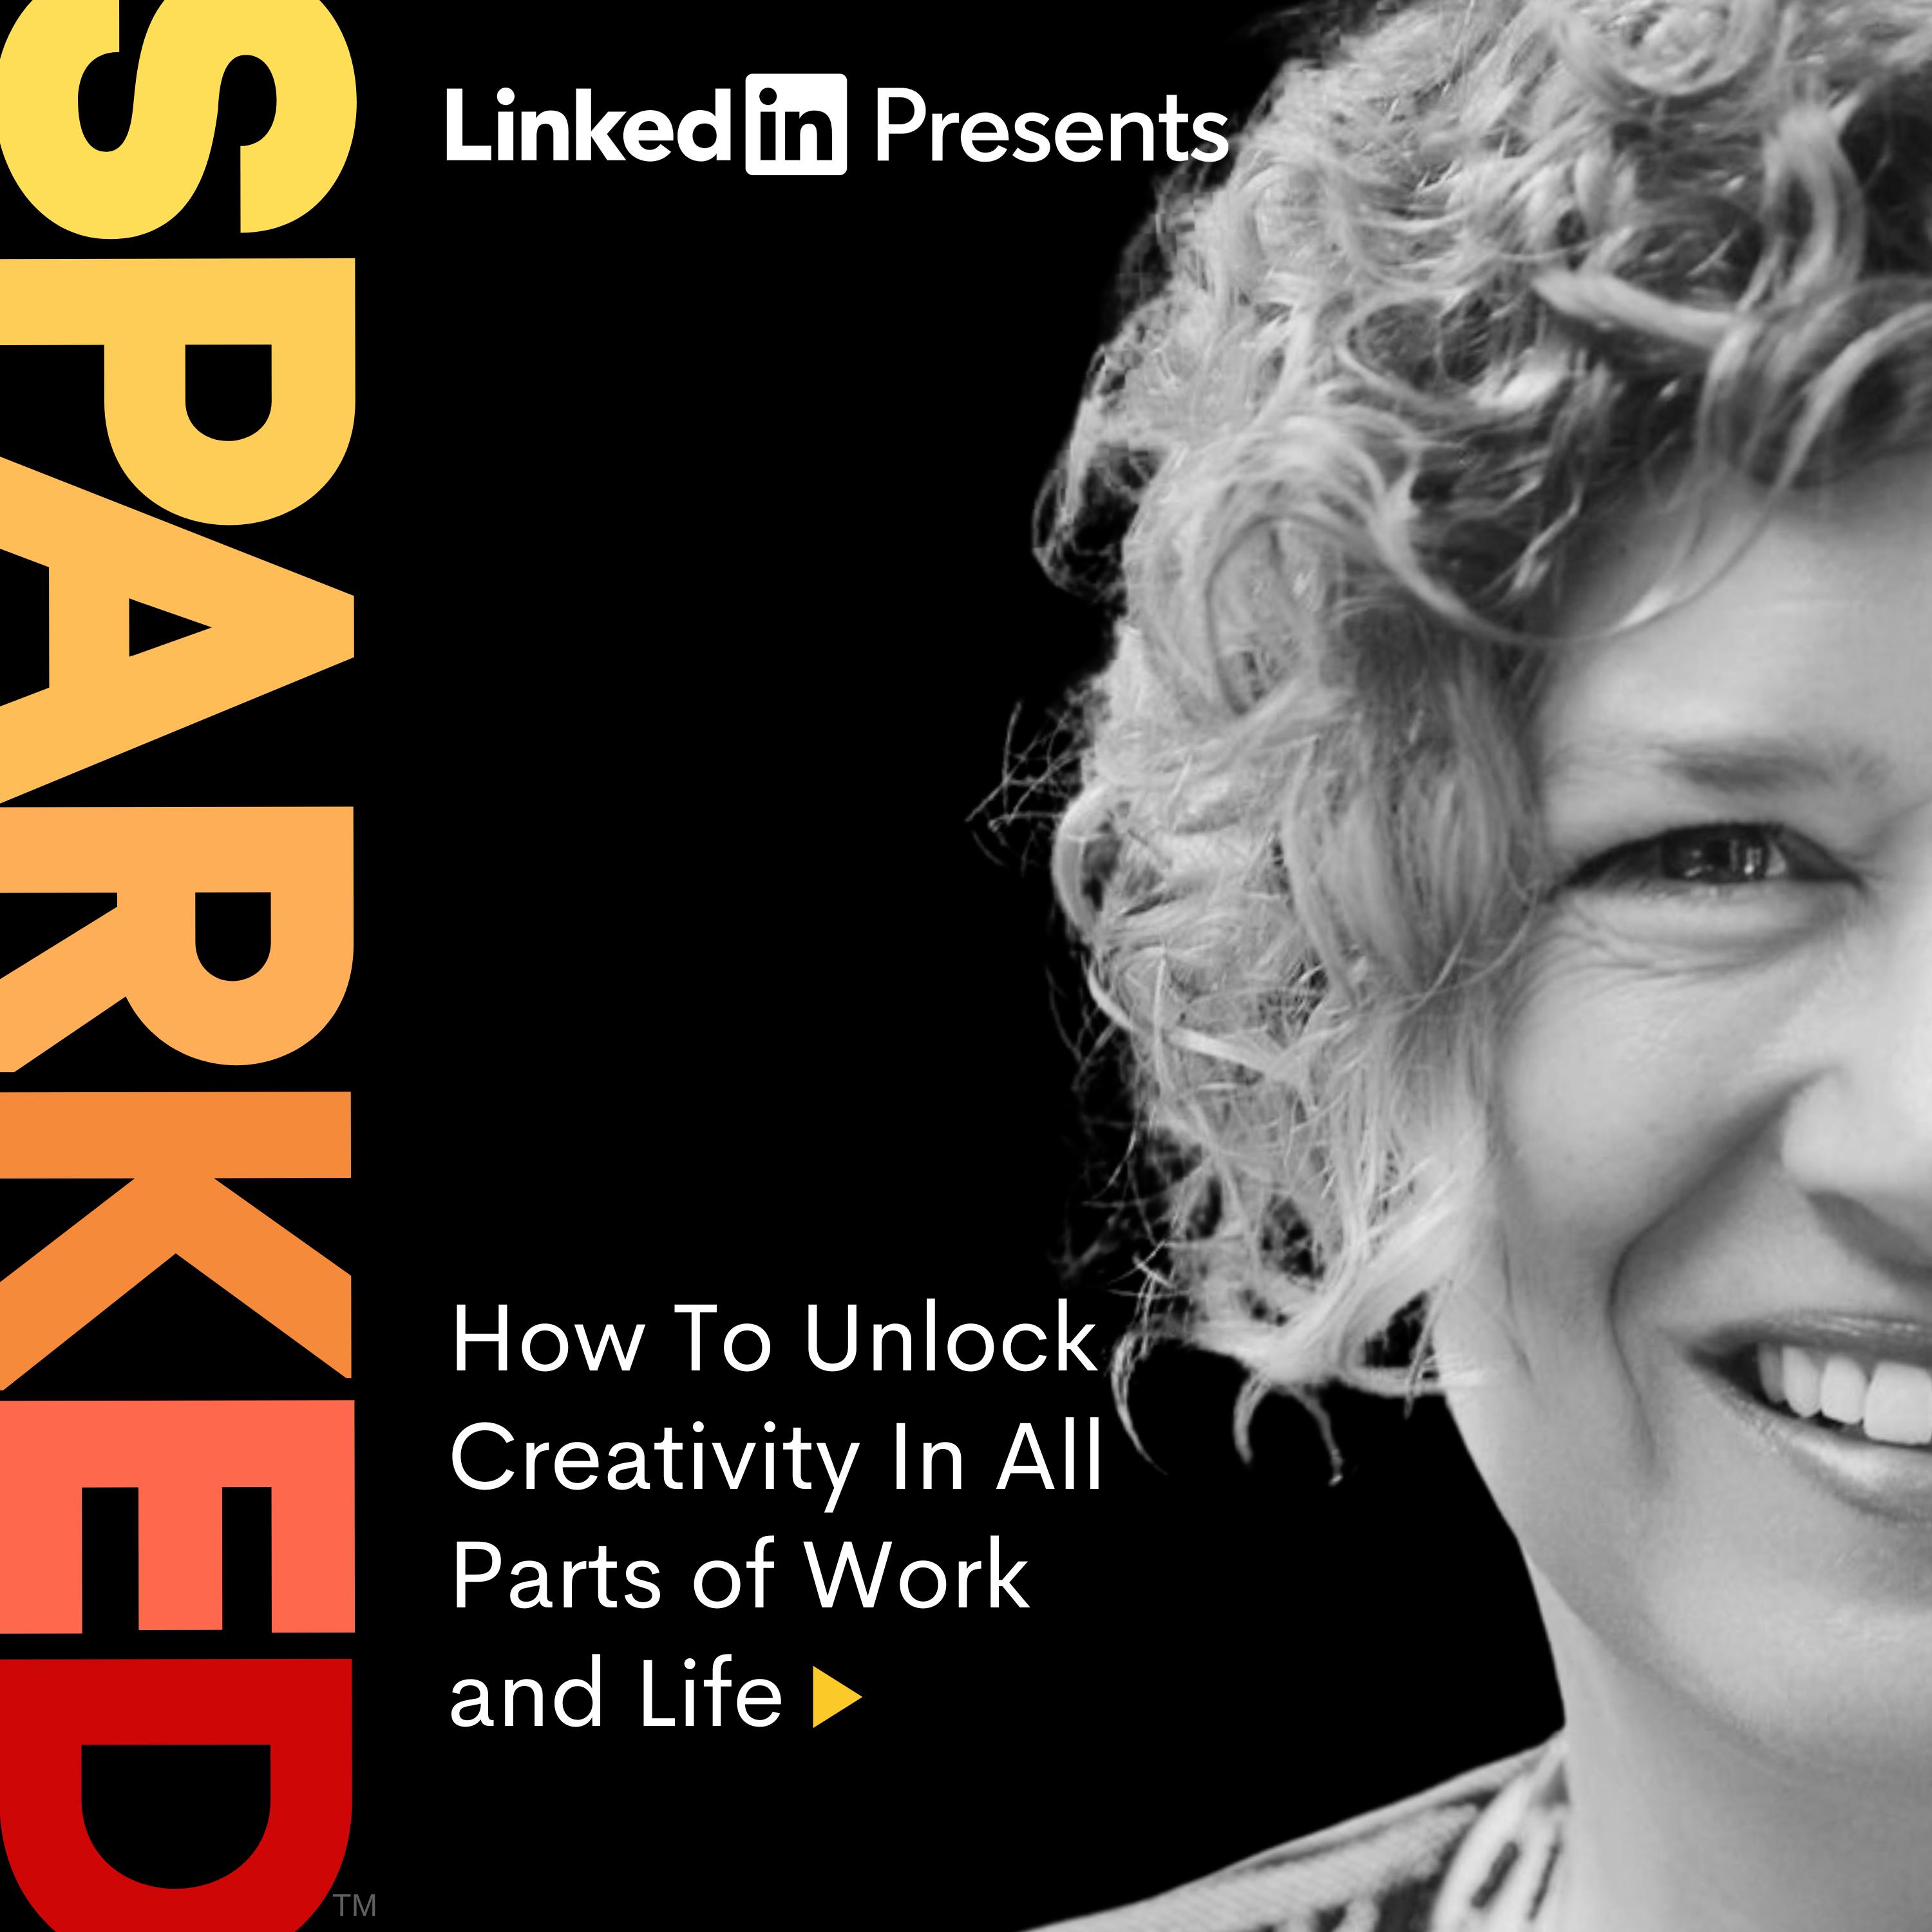 How To Unlock Creativity In All Parts of Work and Life